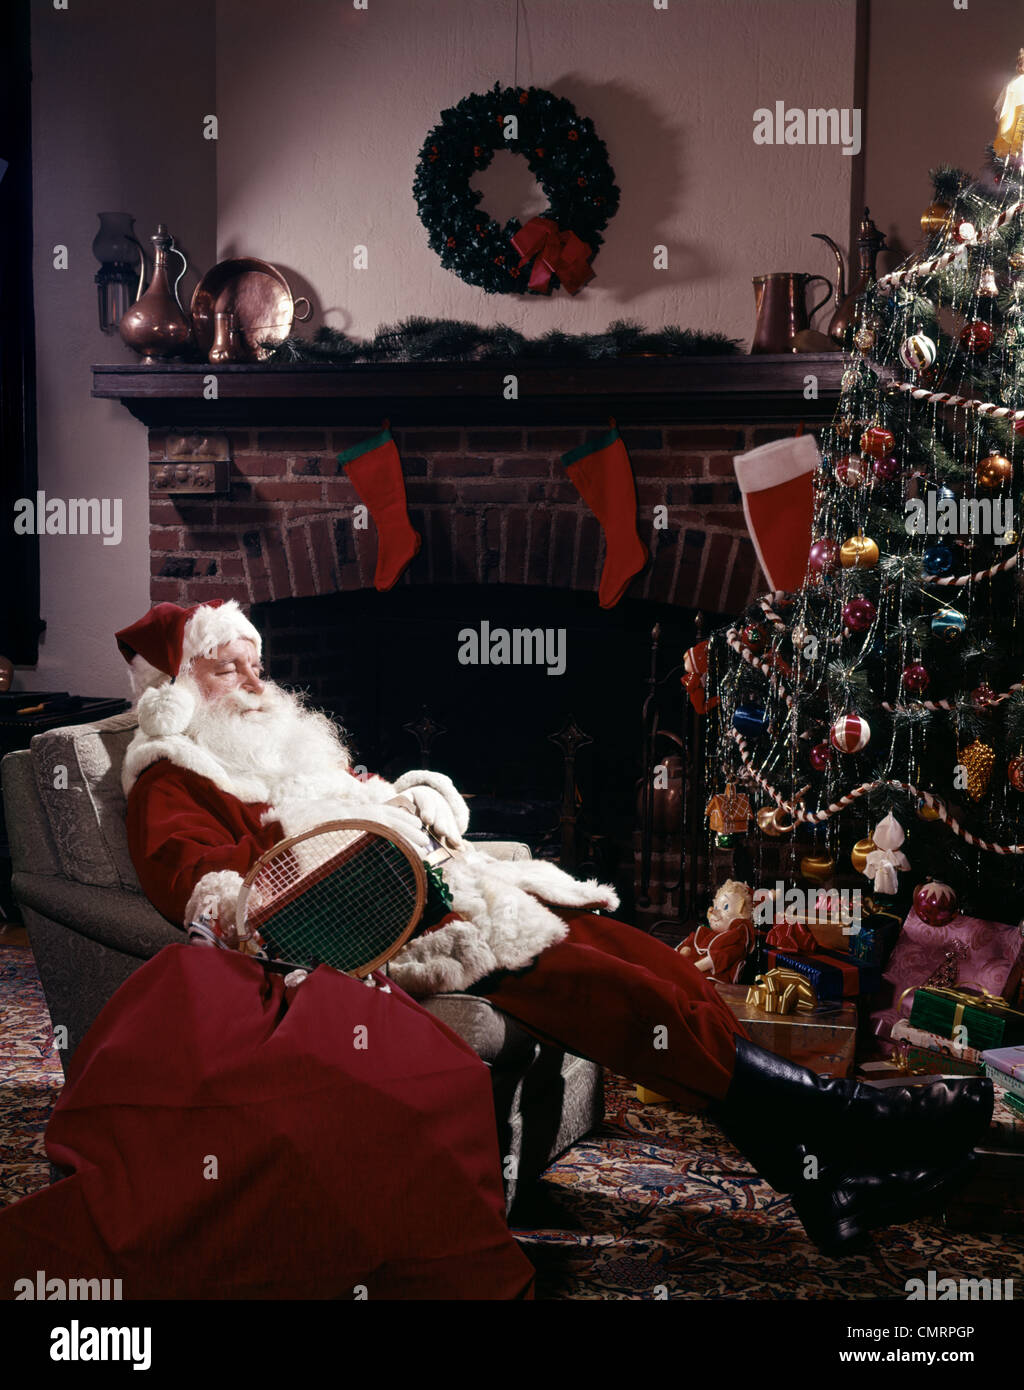 SANTA CLAUS ASLEEP IN CHAIR IN FRONT OF CHRISTMAS TREE AND FIREPLACE INDOOR Stock Photo